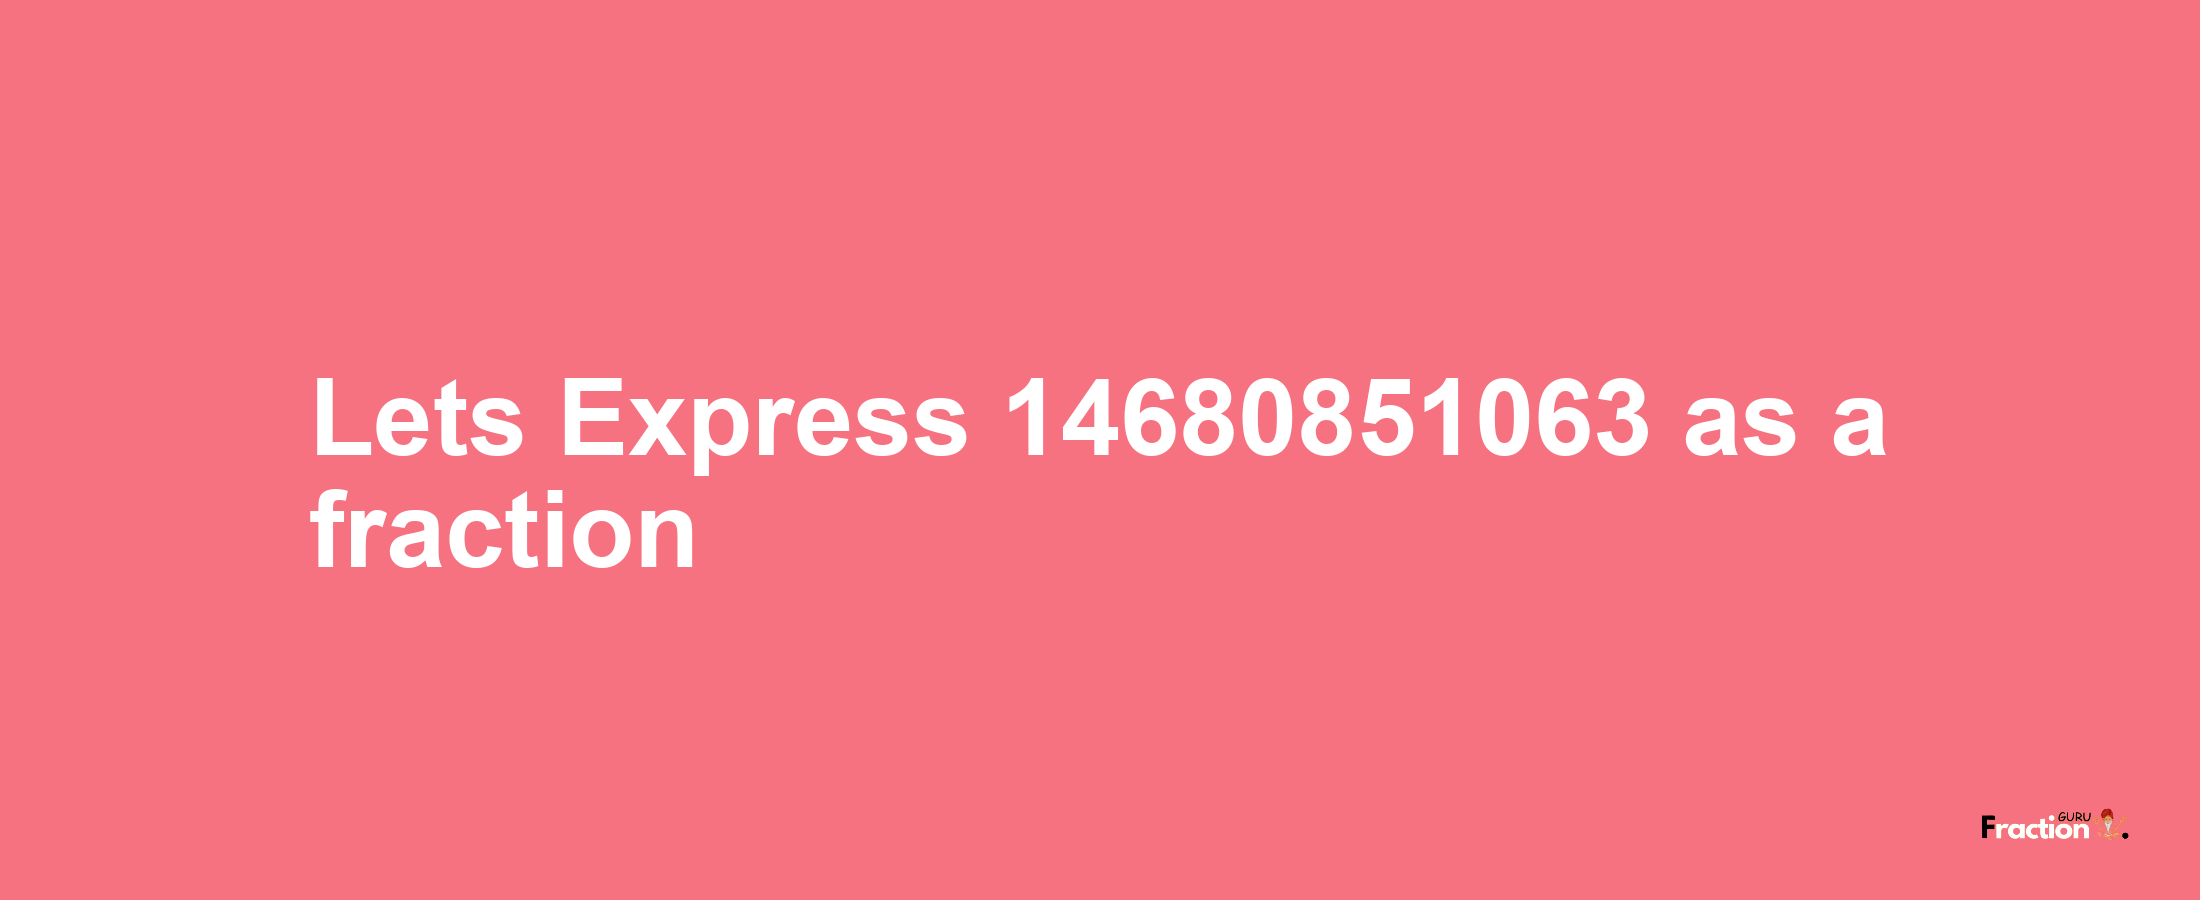 Lets Express 14680851063 as afraction